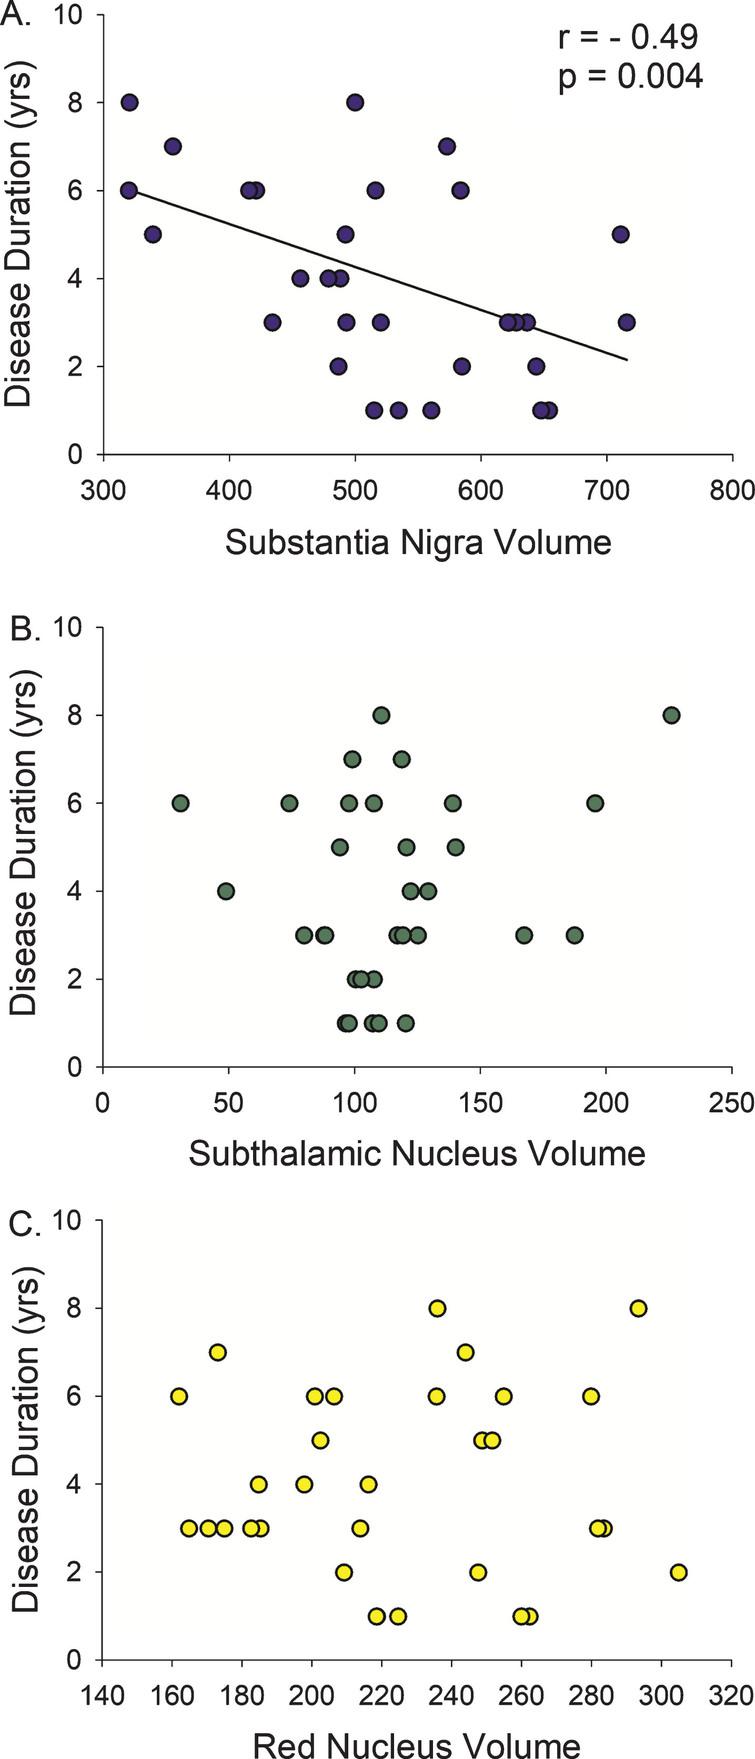 Disease Duration versus Midbrain Nuclei Volumes. Longer duration of Parkinson’s disease diagnosis was only associated with smaller volume of the substantia nigra, not the subthalamic nucleus or the red nucleus. r, Spearman’s rho correlation coefficient.